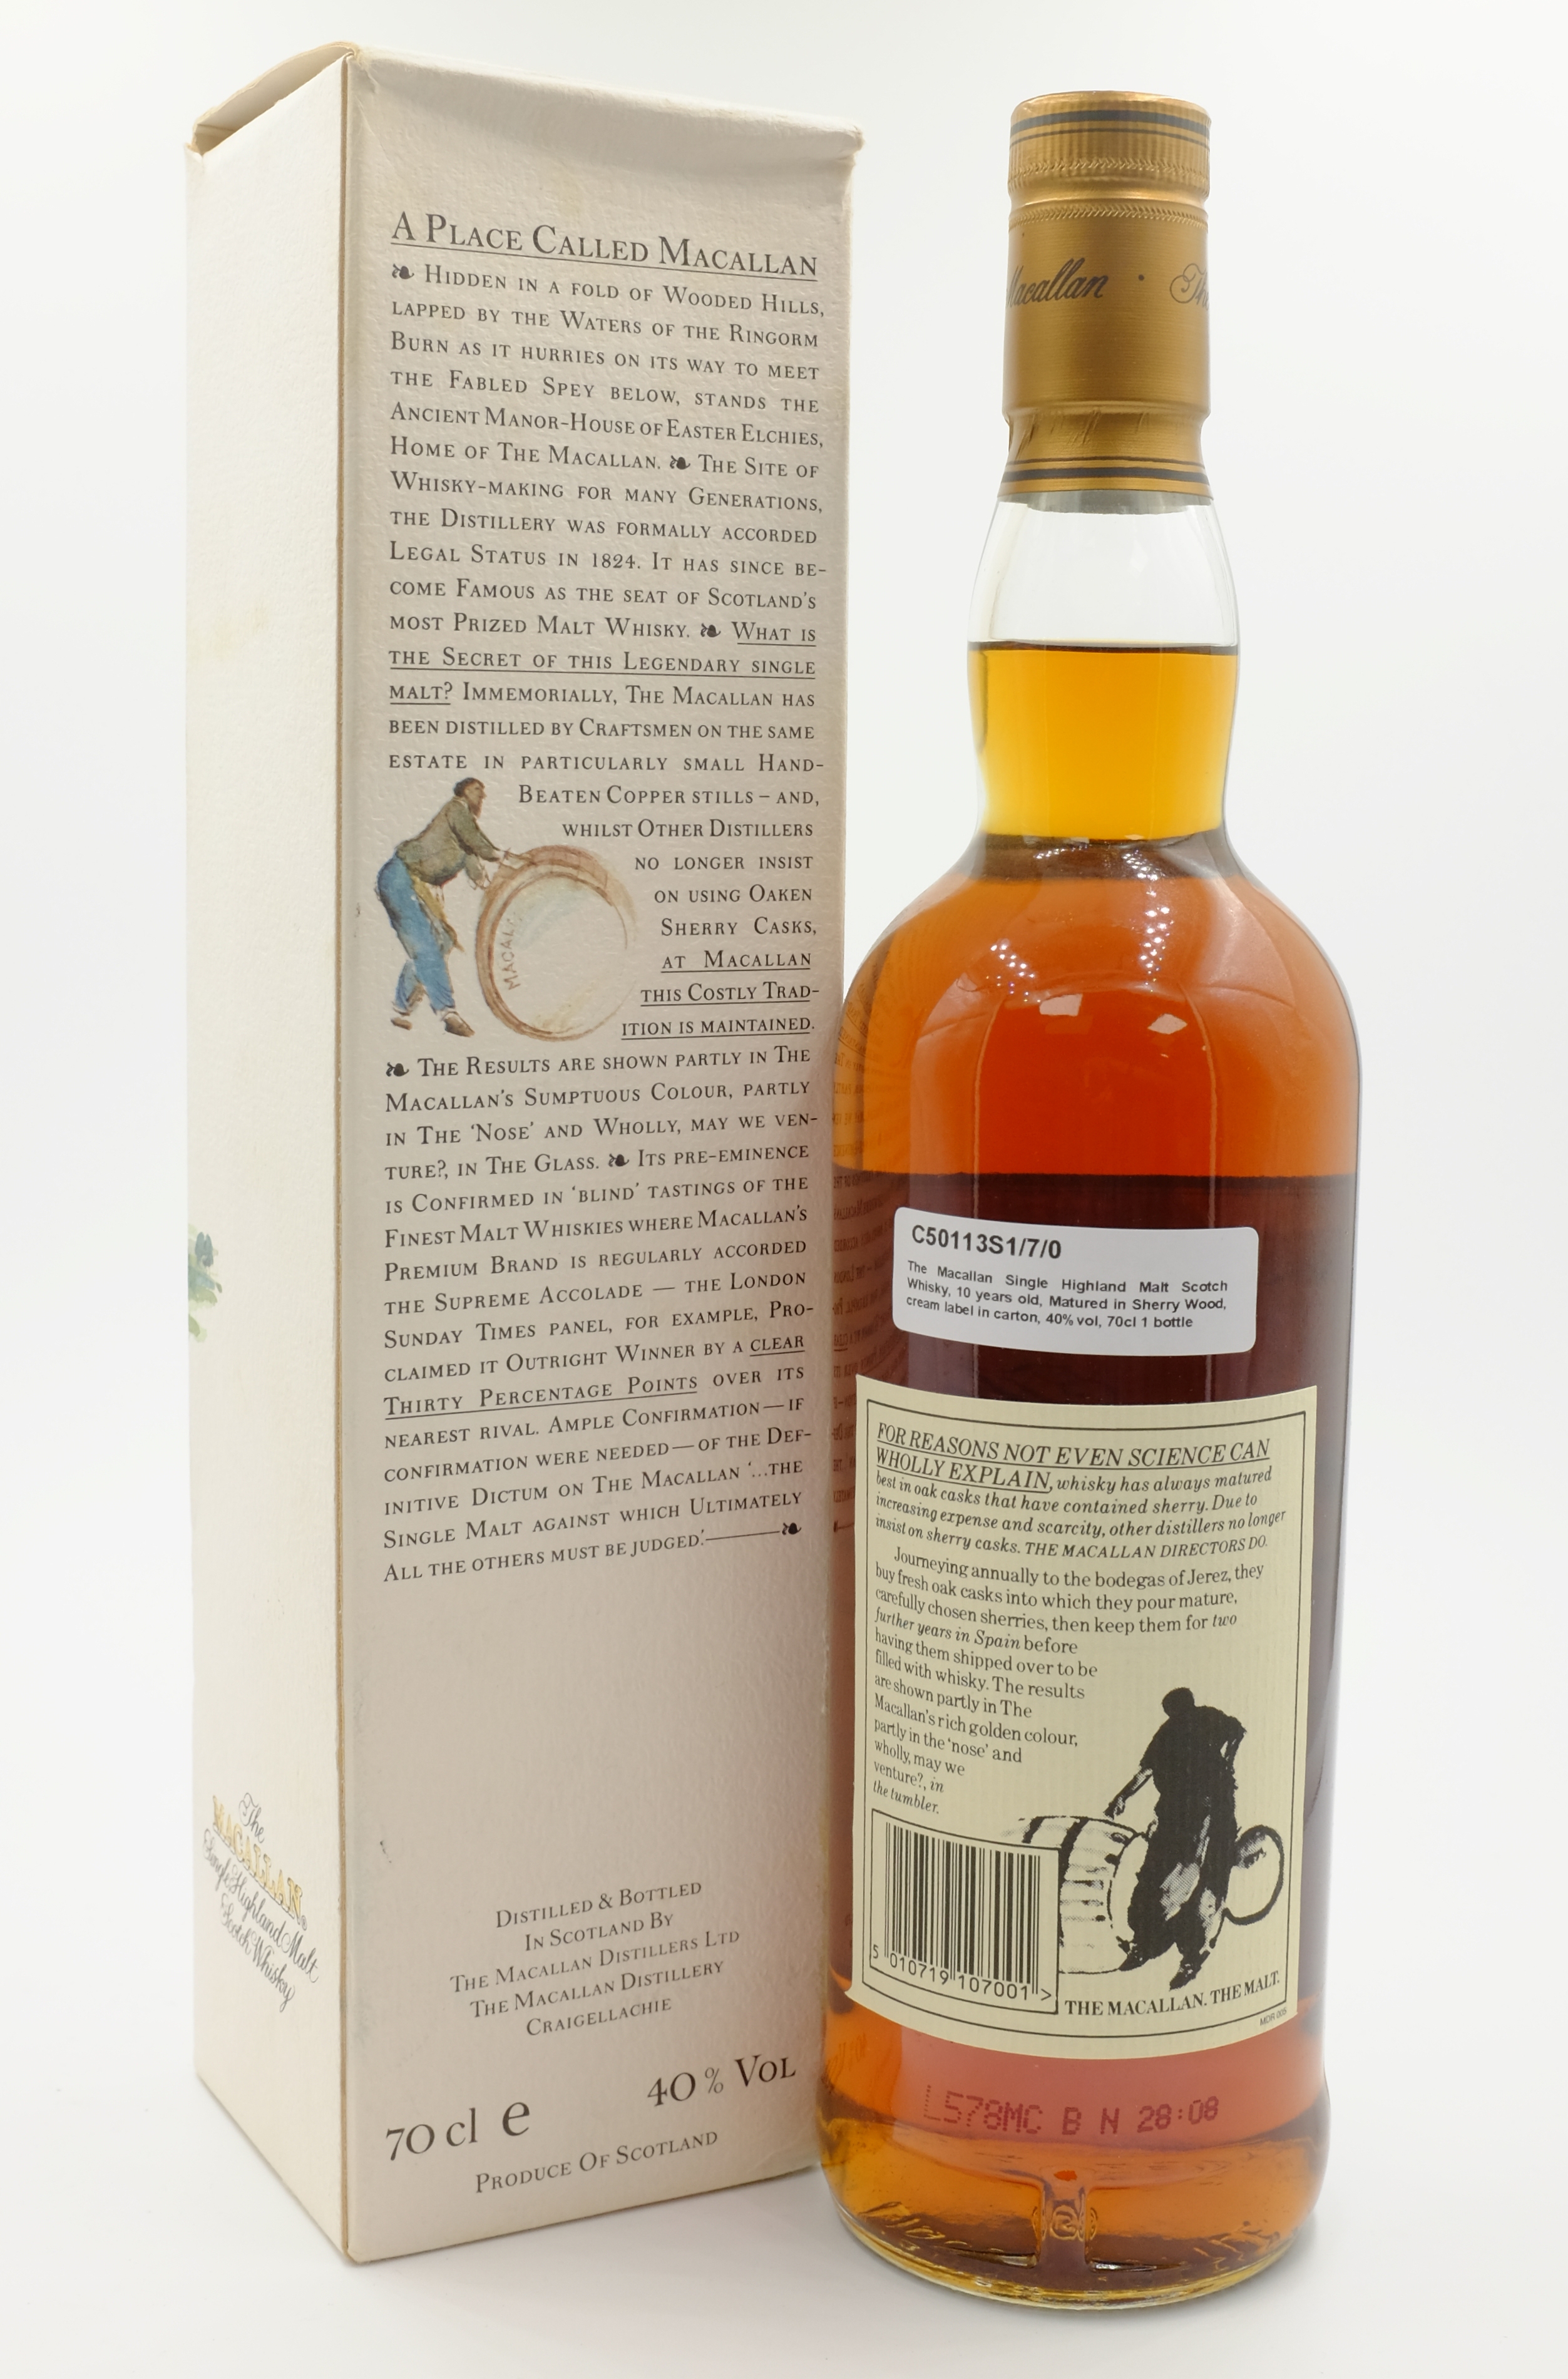 The Macallan Single Highland Malt Scotch Whisky, 10 years old, Matured in Sherry Wood, - Image 2 of 2